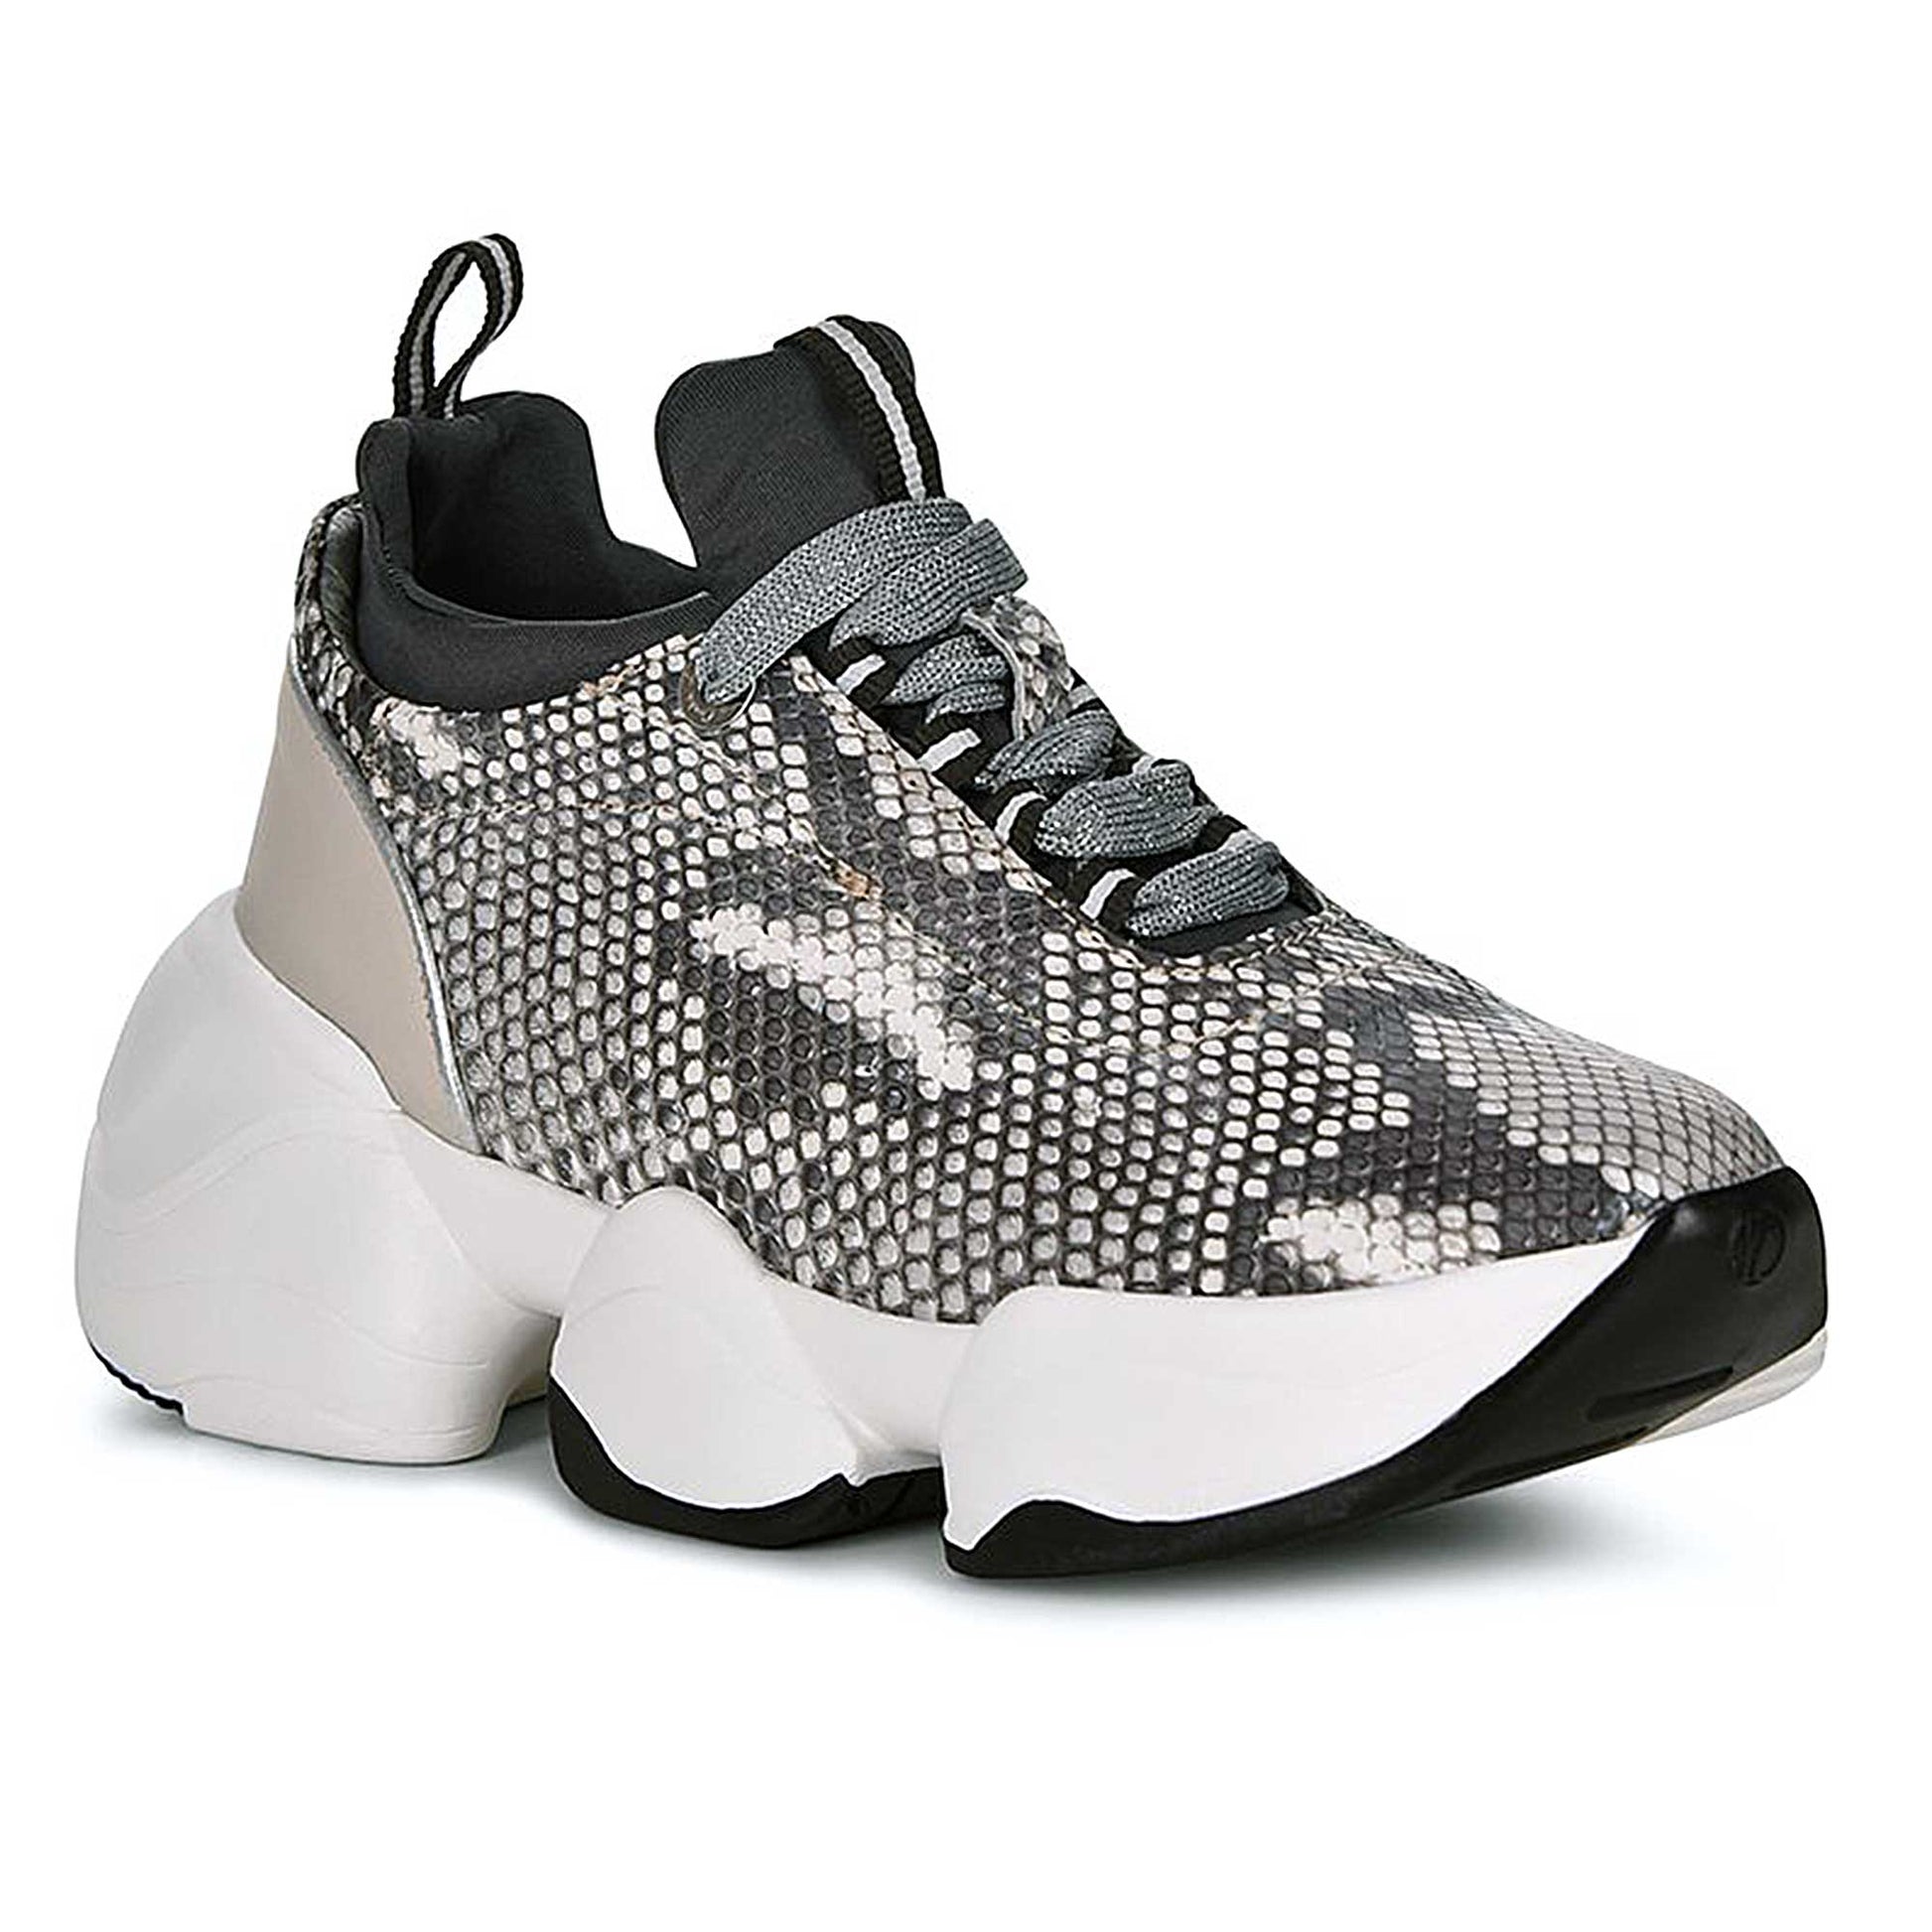 Python grey leather sneakers, Sneakers for women in genuine python leather, with lycra application, lace and two-tone double-density sole.